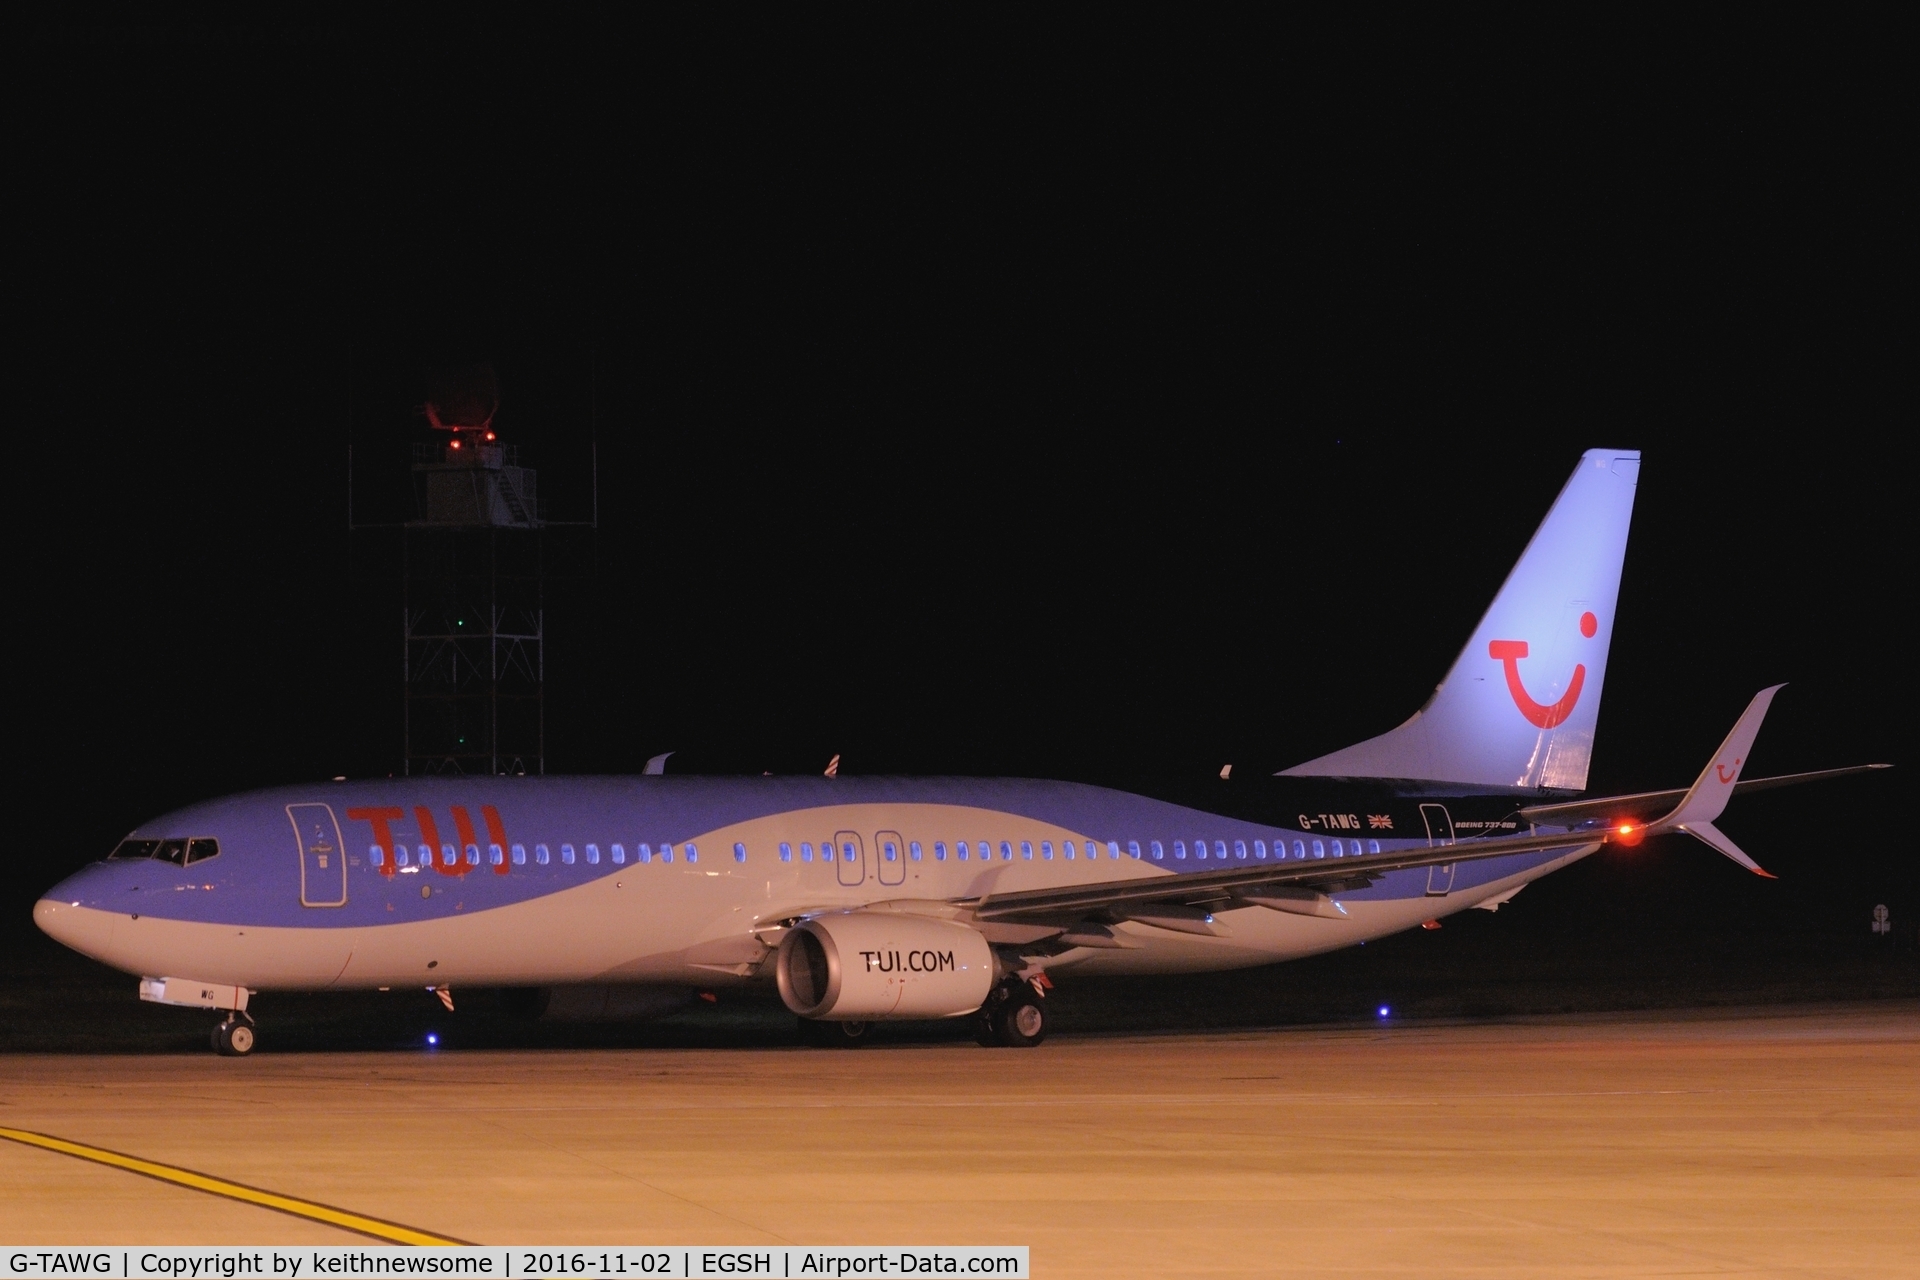 G-TAWG, 2012 Boeing 737-8K5 C/N 37266, With TUI titles.